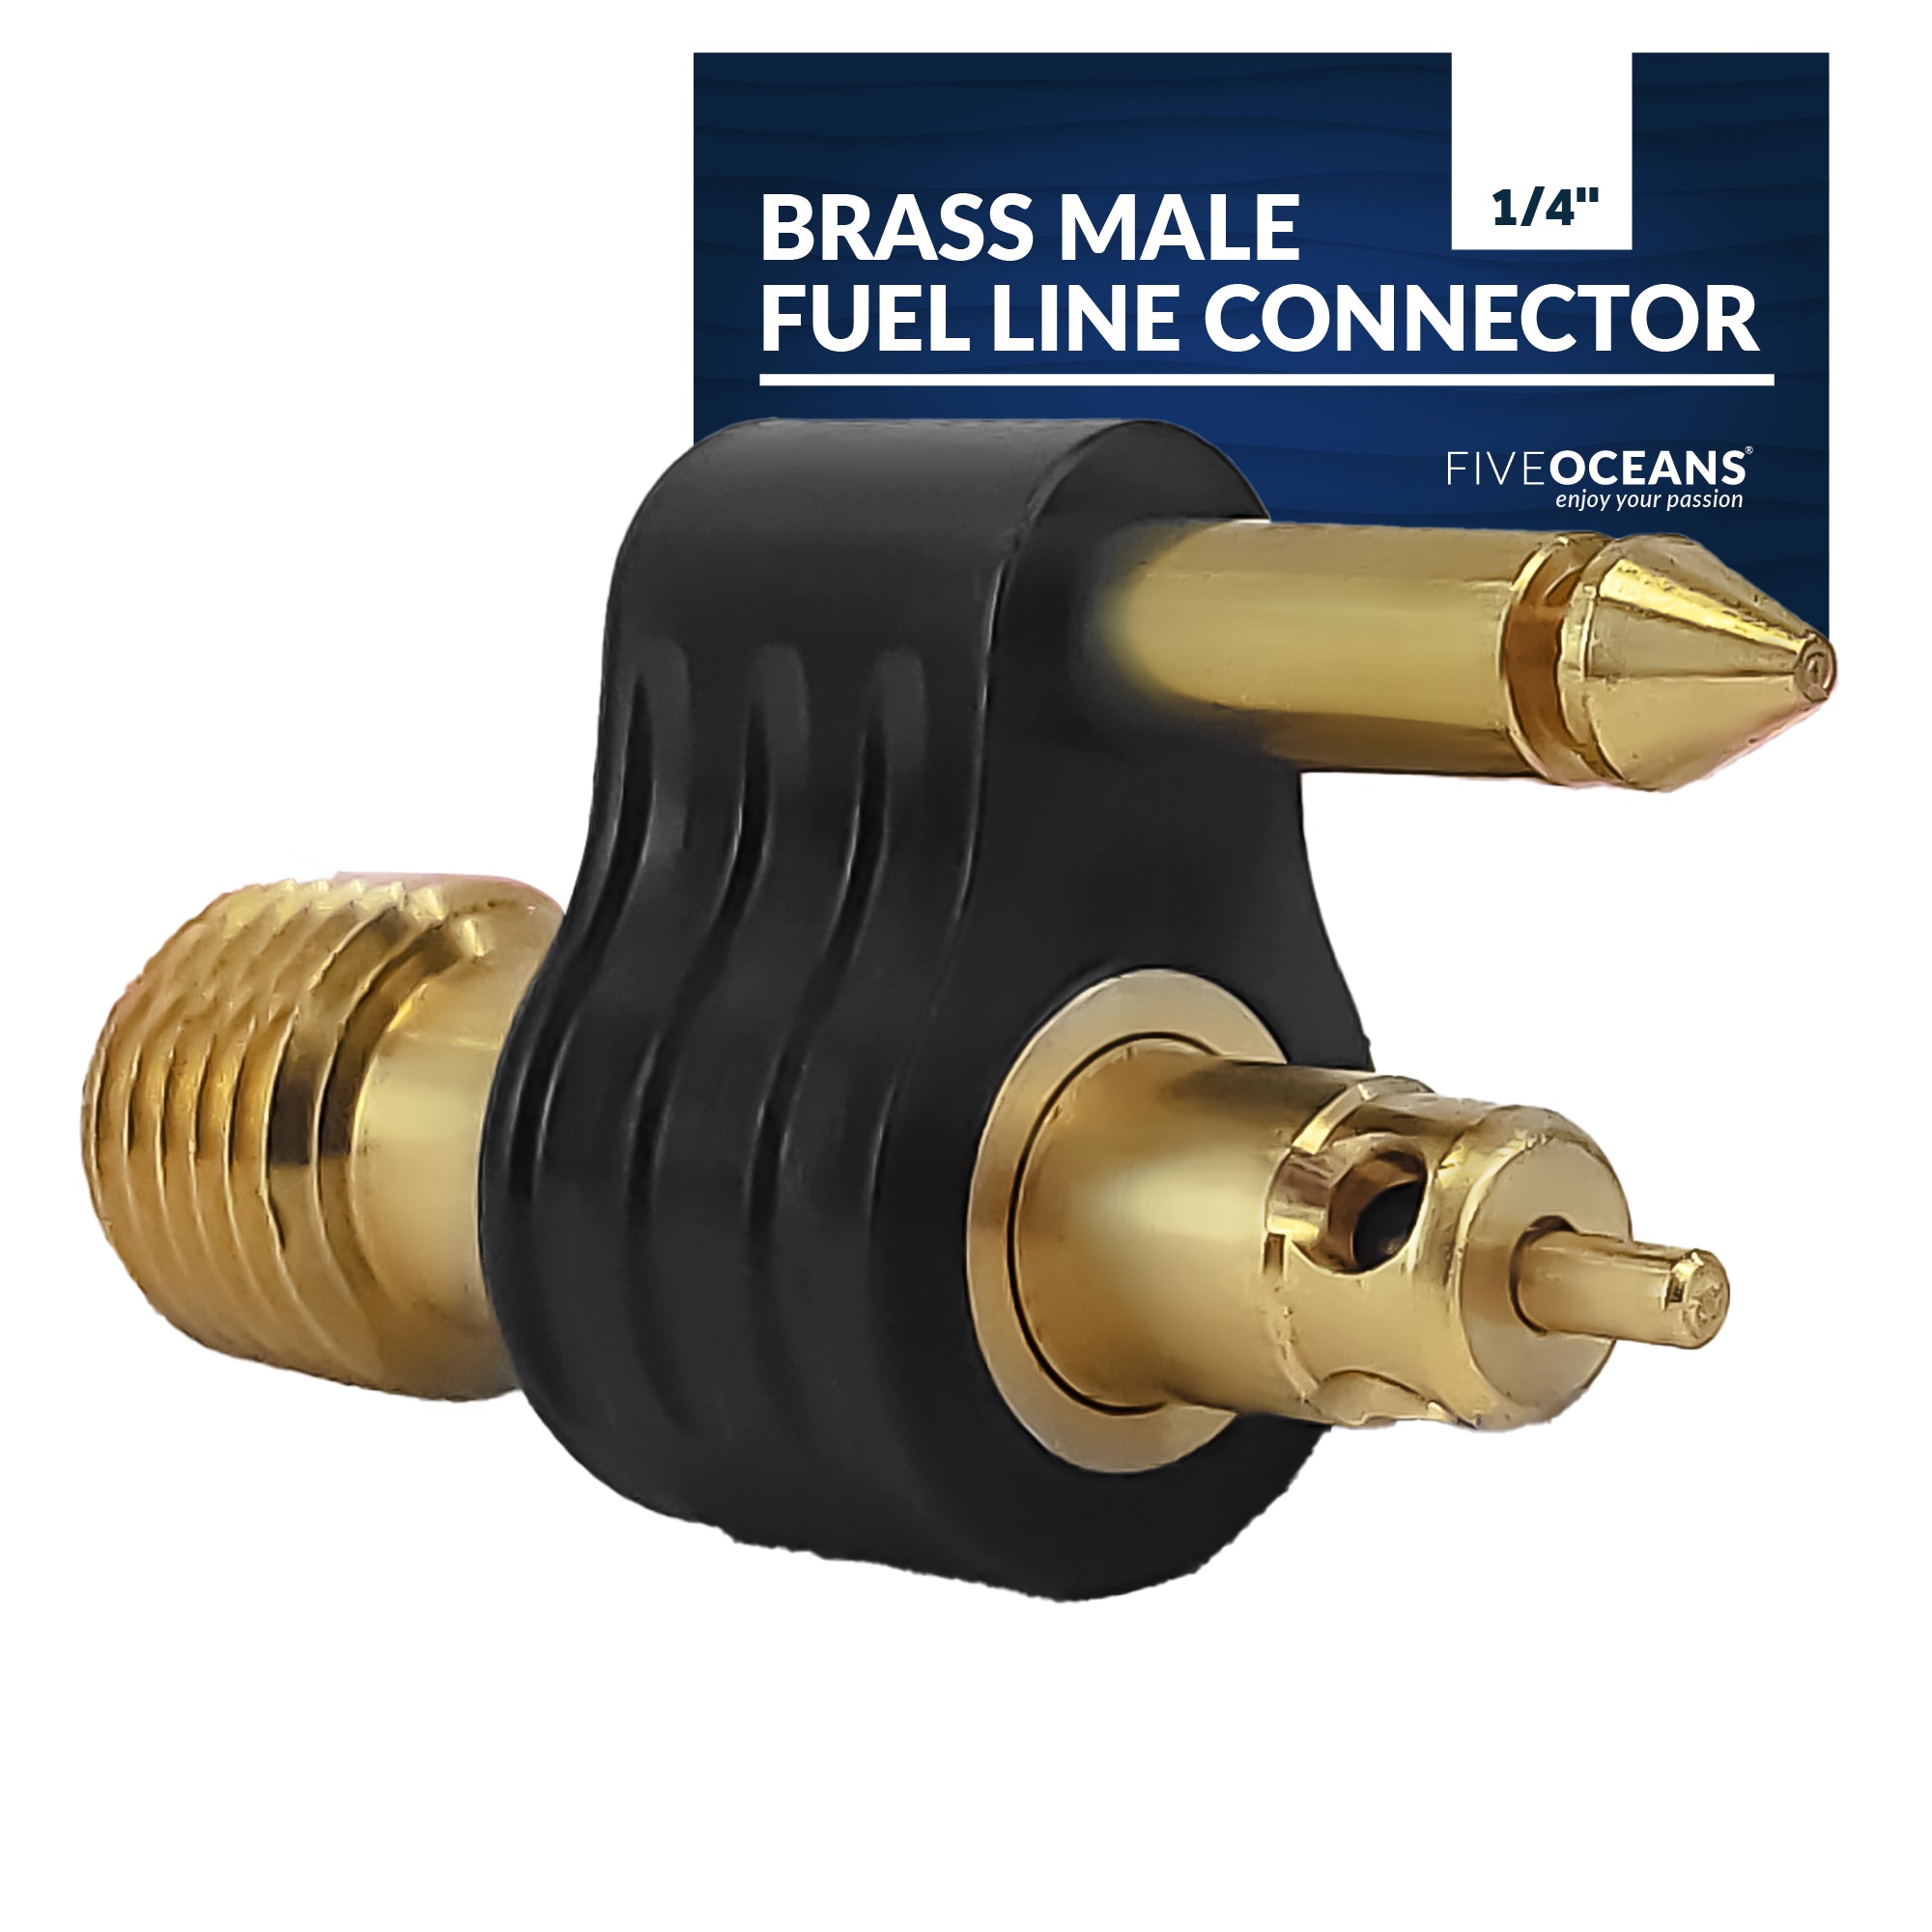 1/4" Male Fuel Line Connector 2-Prong, for Mercury Fuel Tank Connection 1998 and Up - FO4409